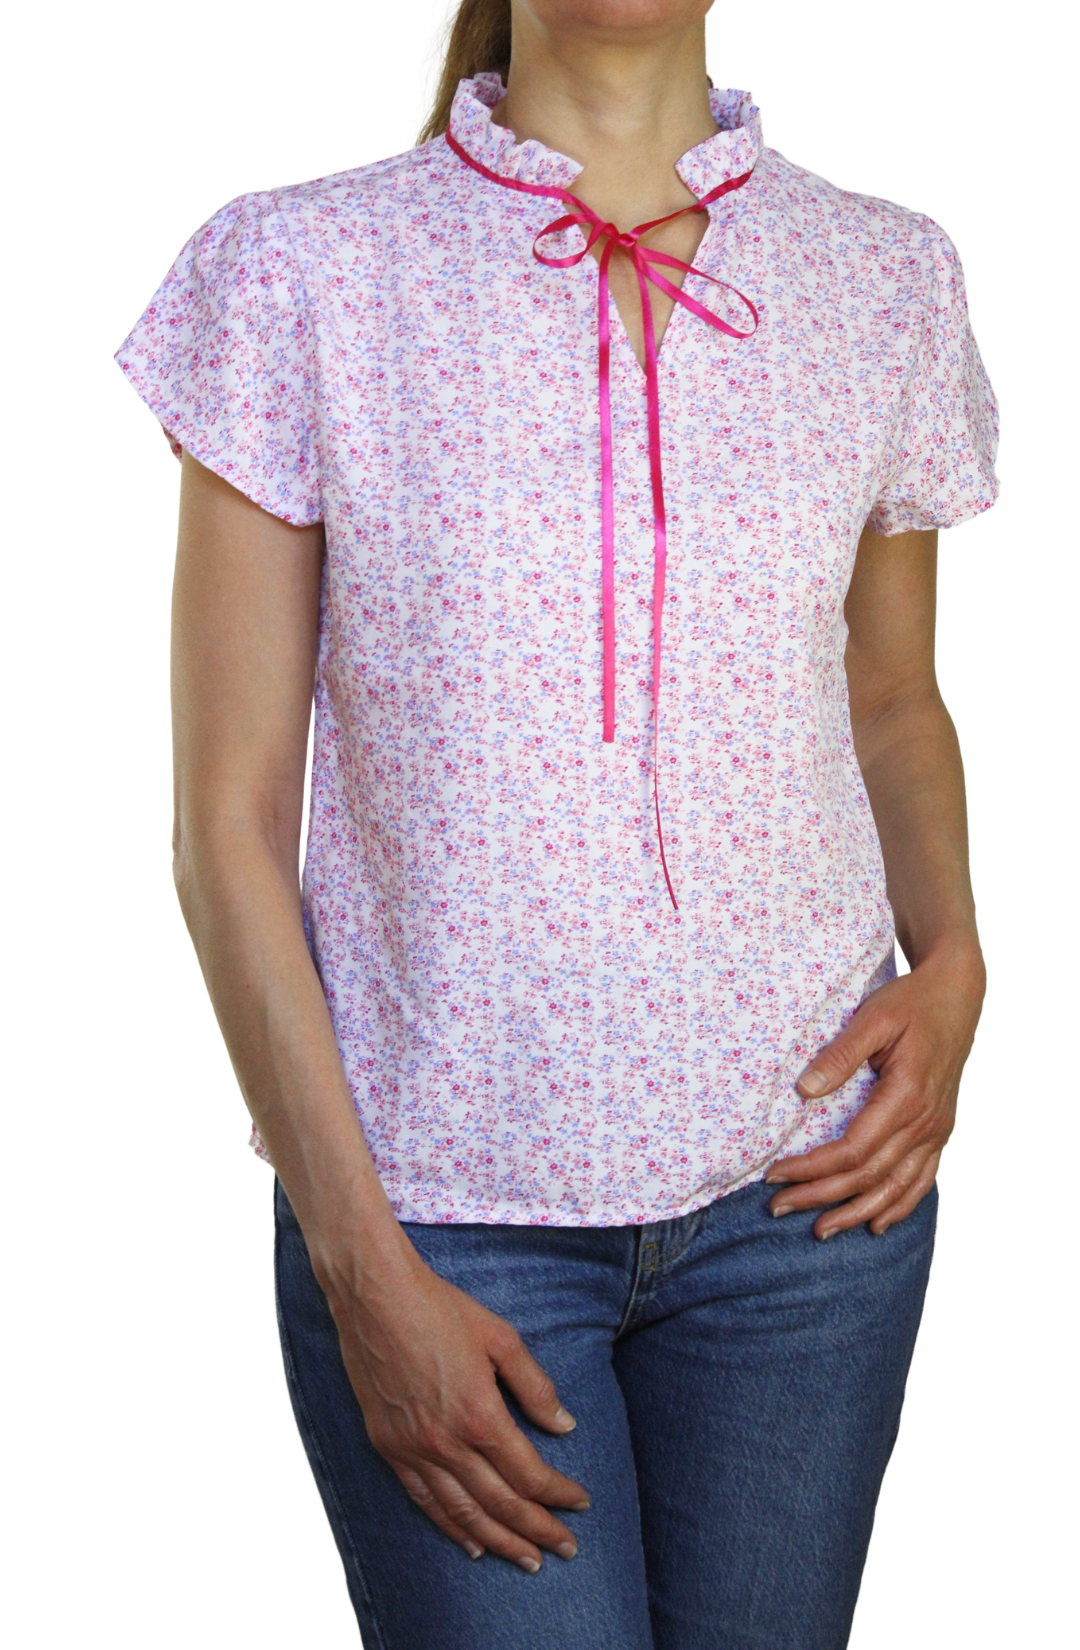 Blusa Floral Rosa 10064 Mujer